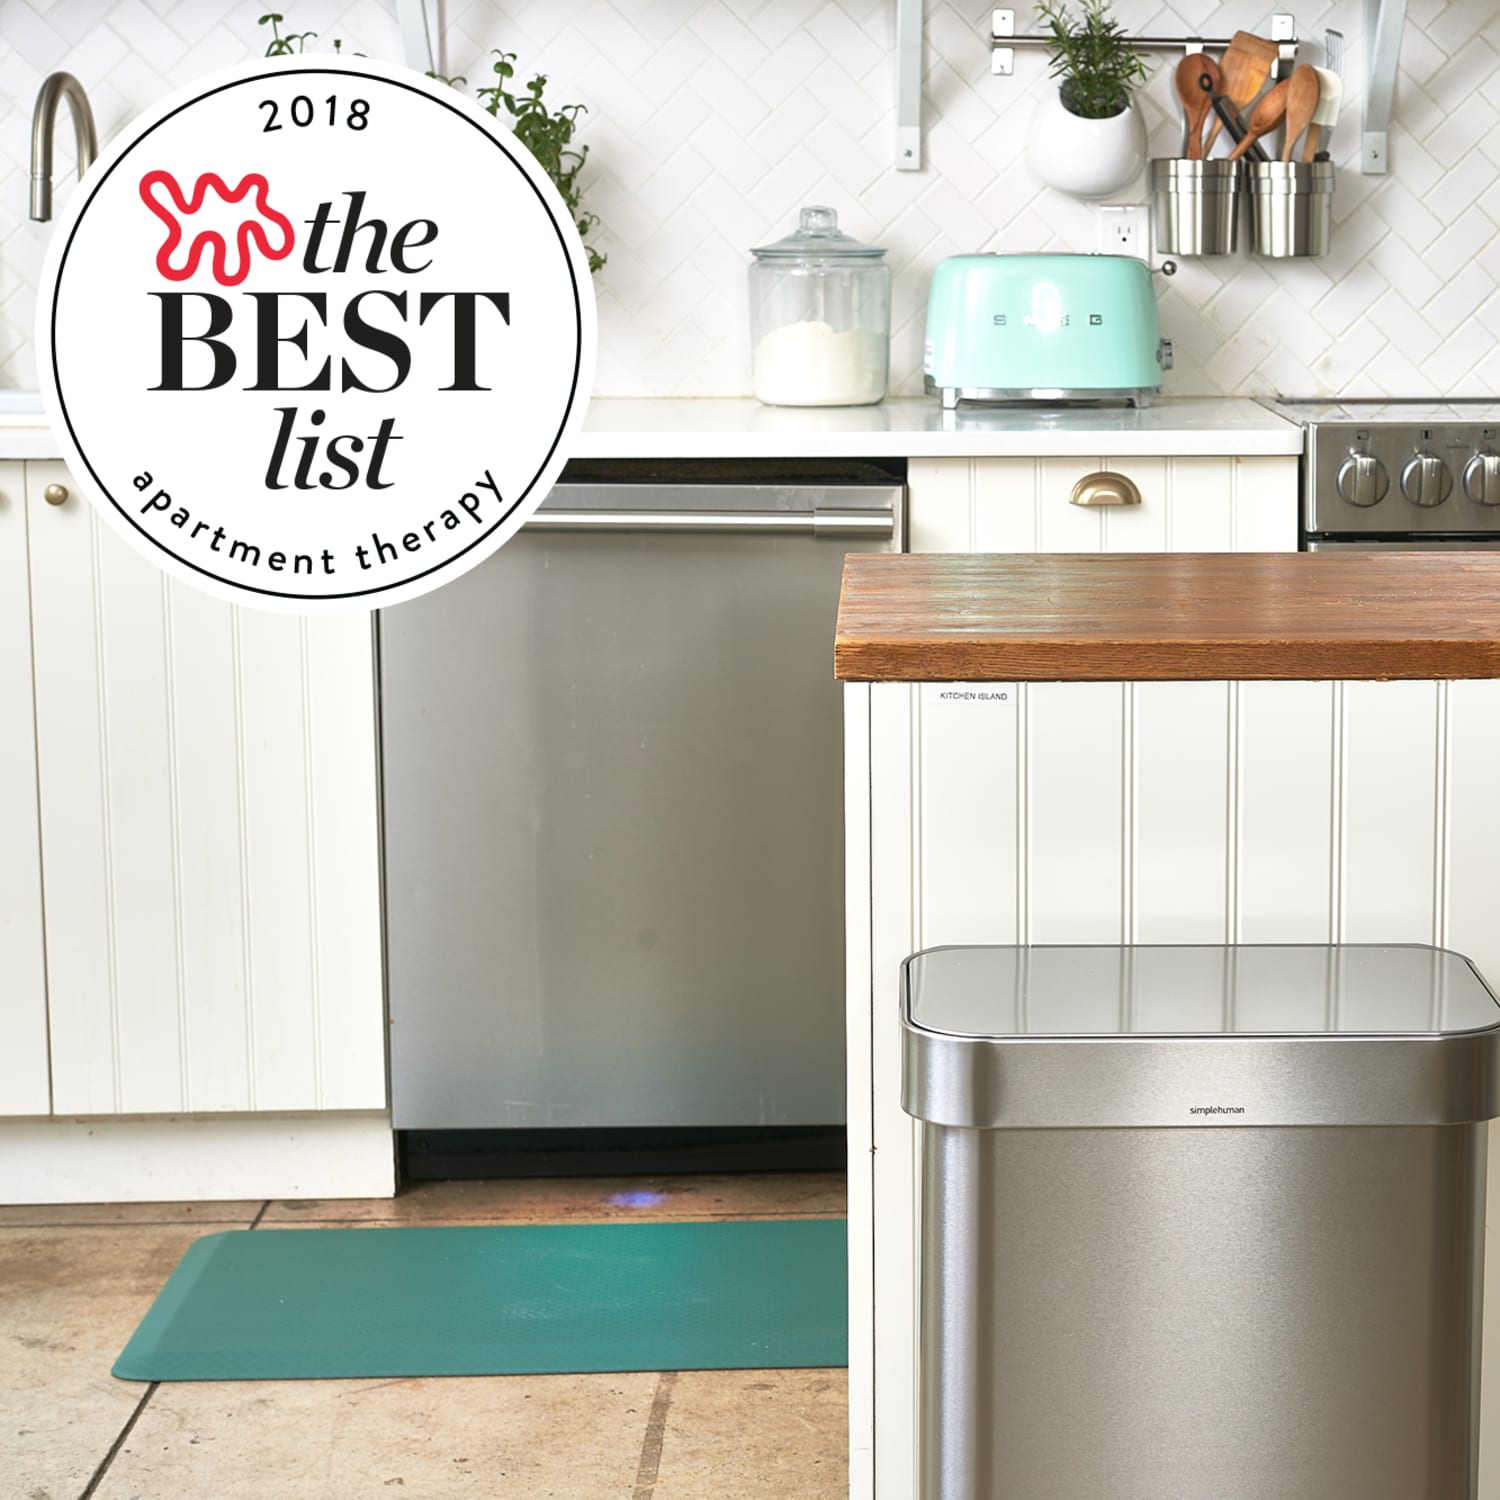 The Best Kitchen Trash Cans - 2018 Annual Guide